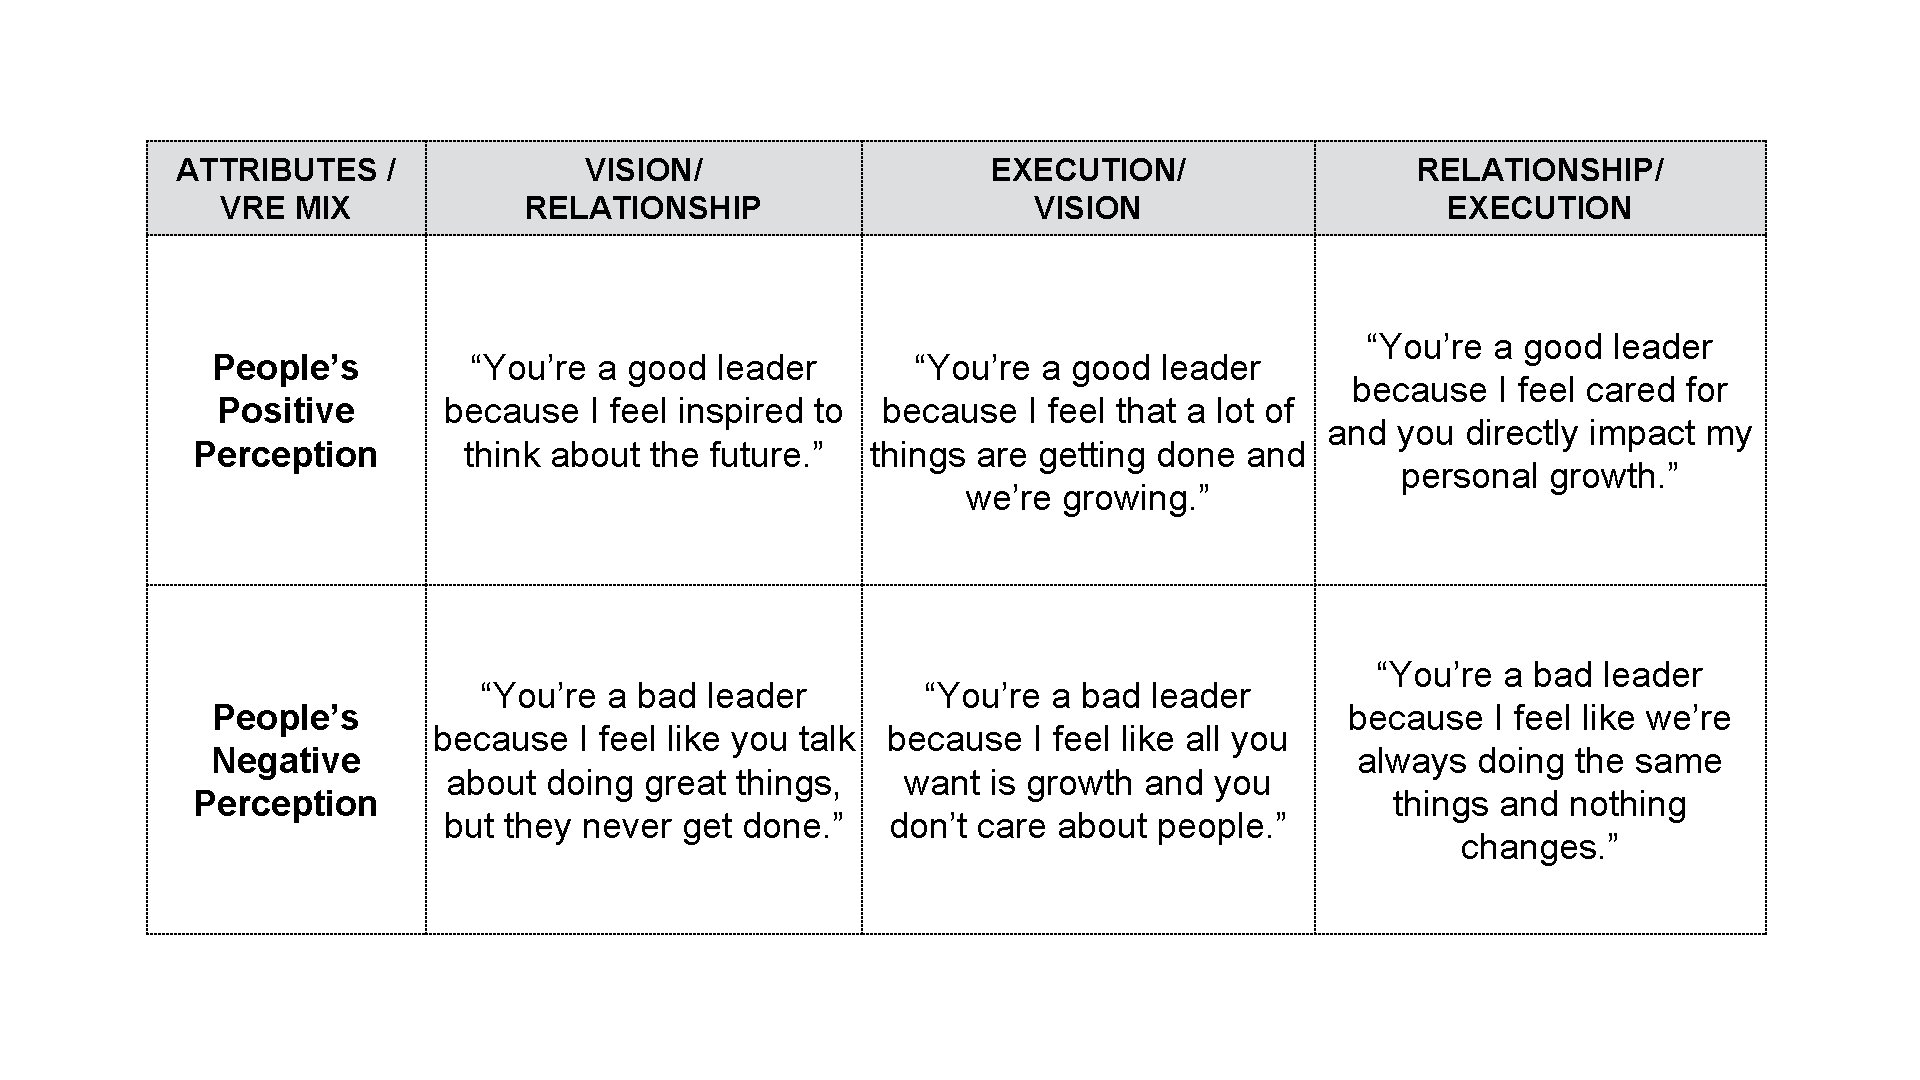 ATTRIBUTES / VRE MIX People’s Positive Perception People’s Negative Perception VISION/ RELATIONSHIP EXECUTION/ VISION